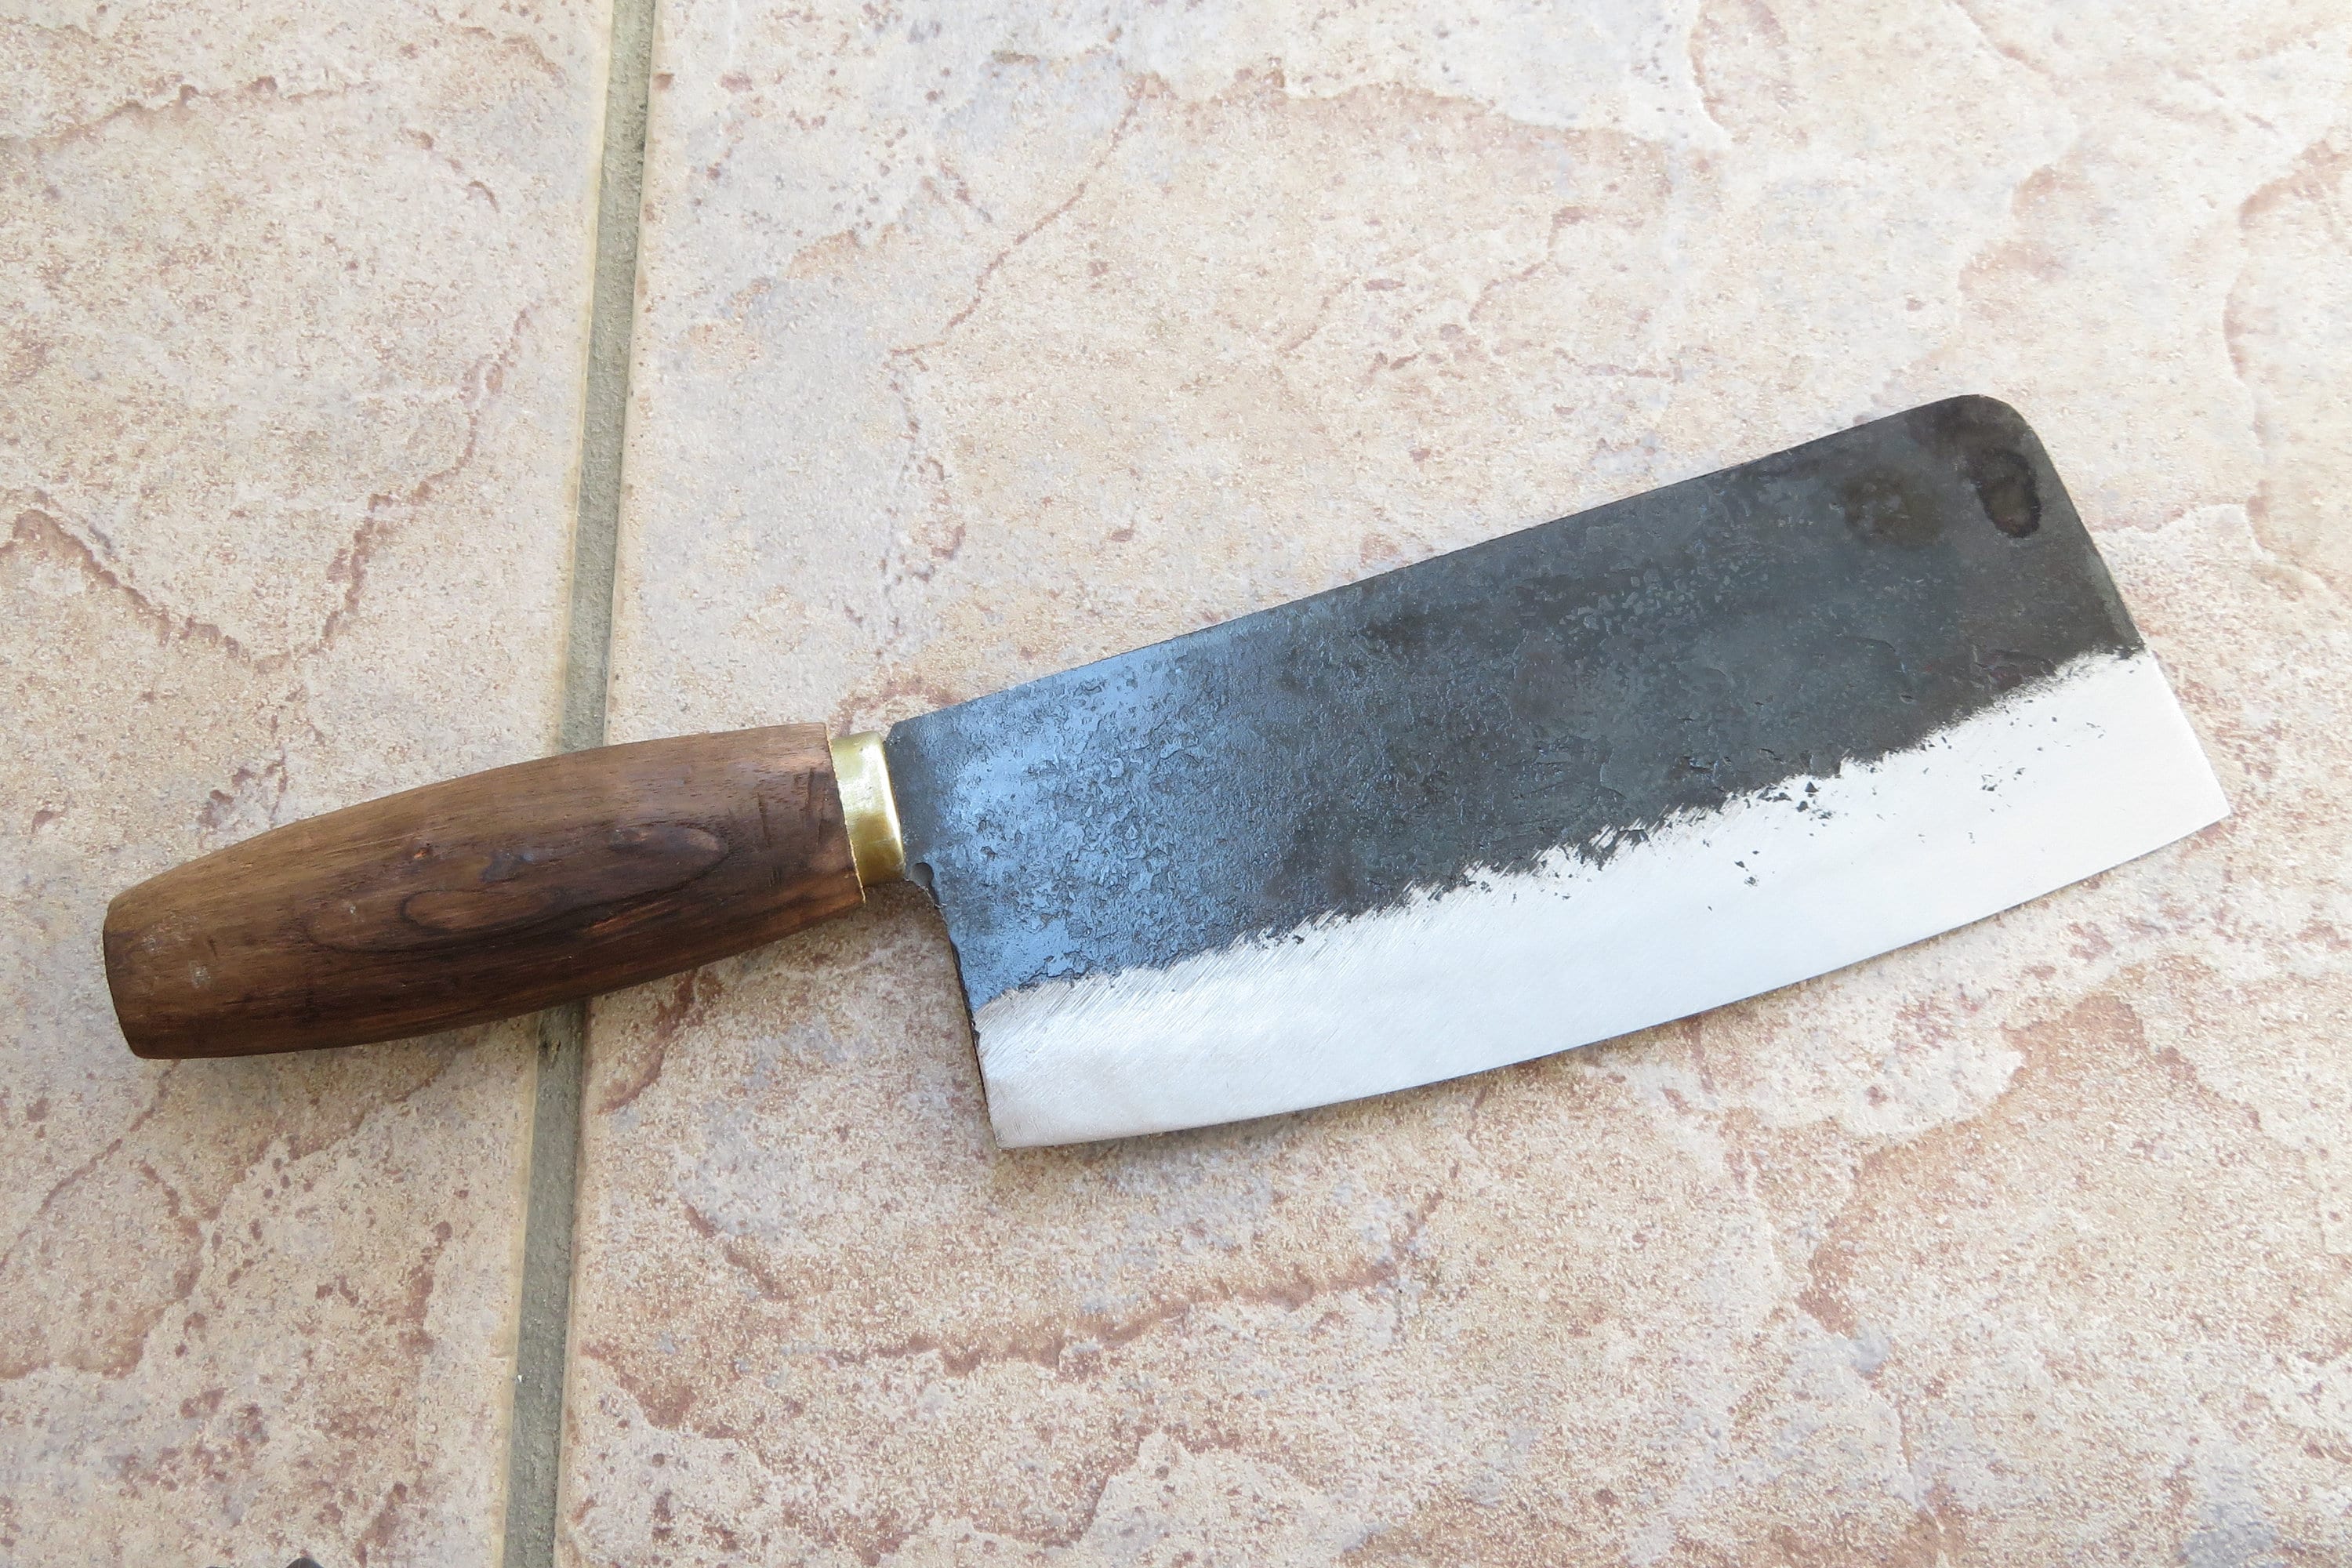 Crude Premium Chinese Cleaver Vegetable Chef Knife, 8 Inch Narrow